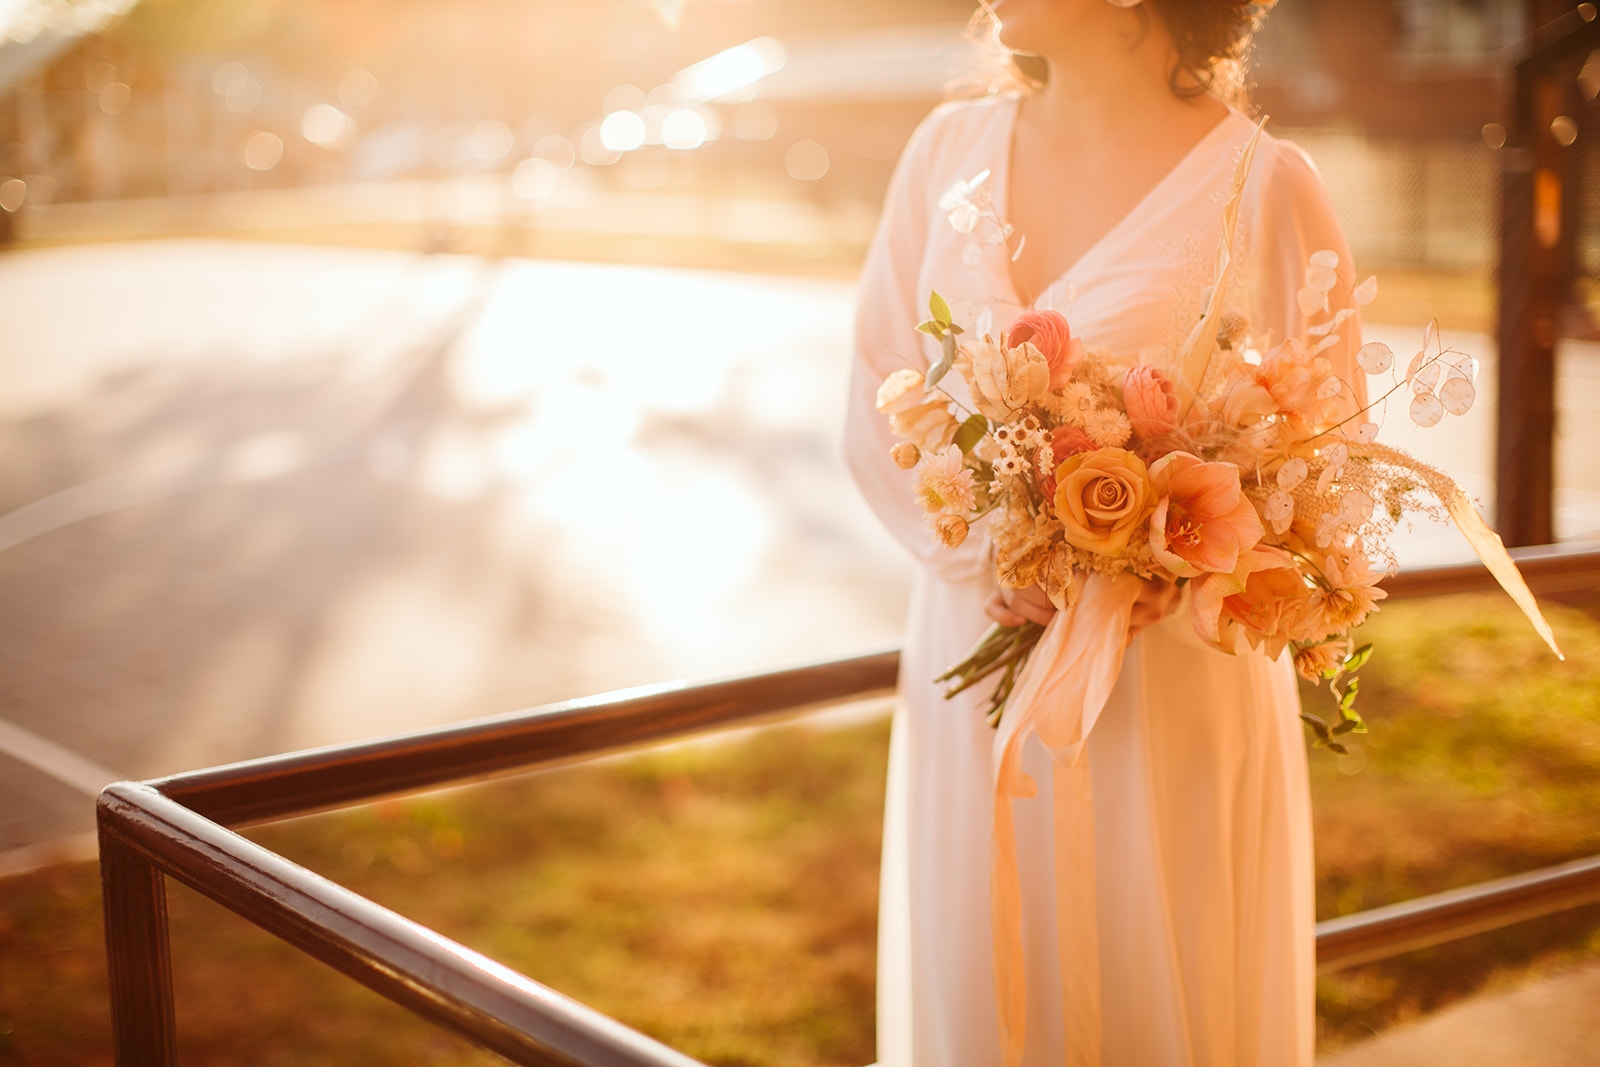 Bride poses in vintage wedding dress with a bouquet of light pink roses.